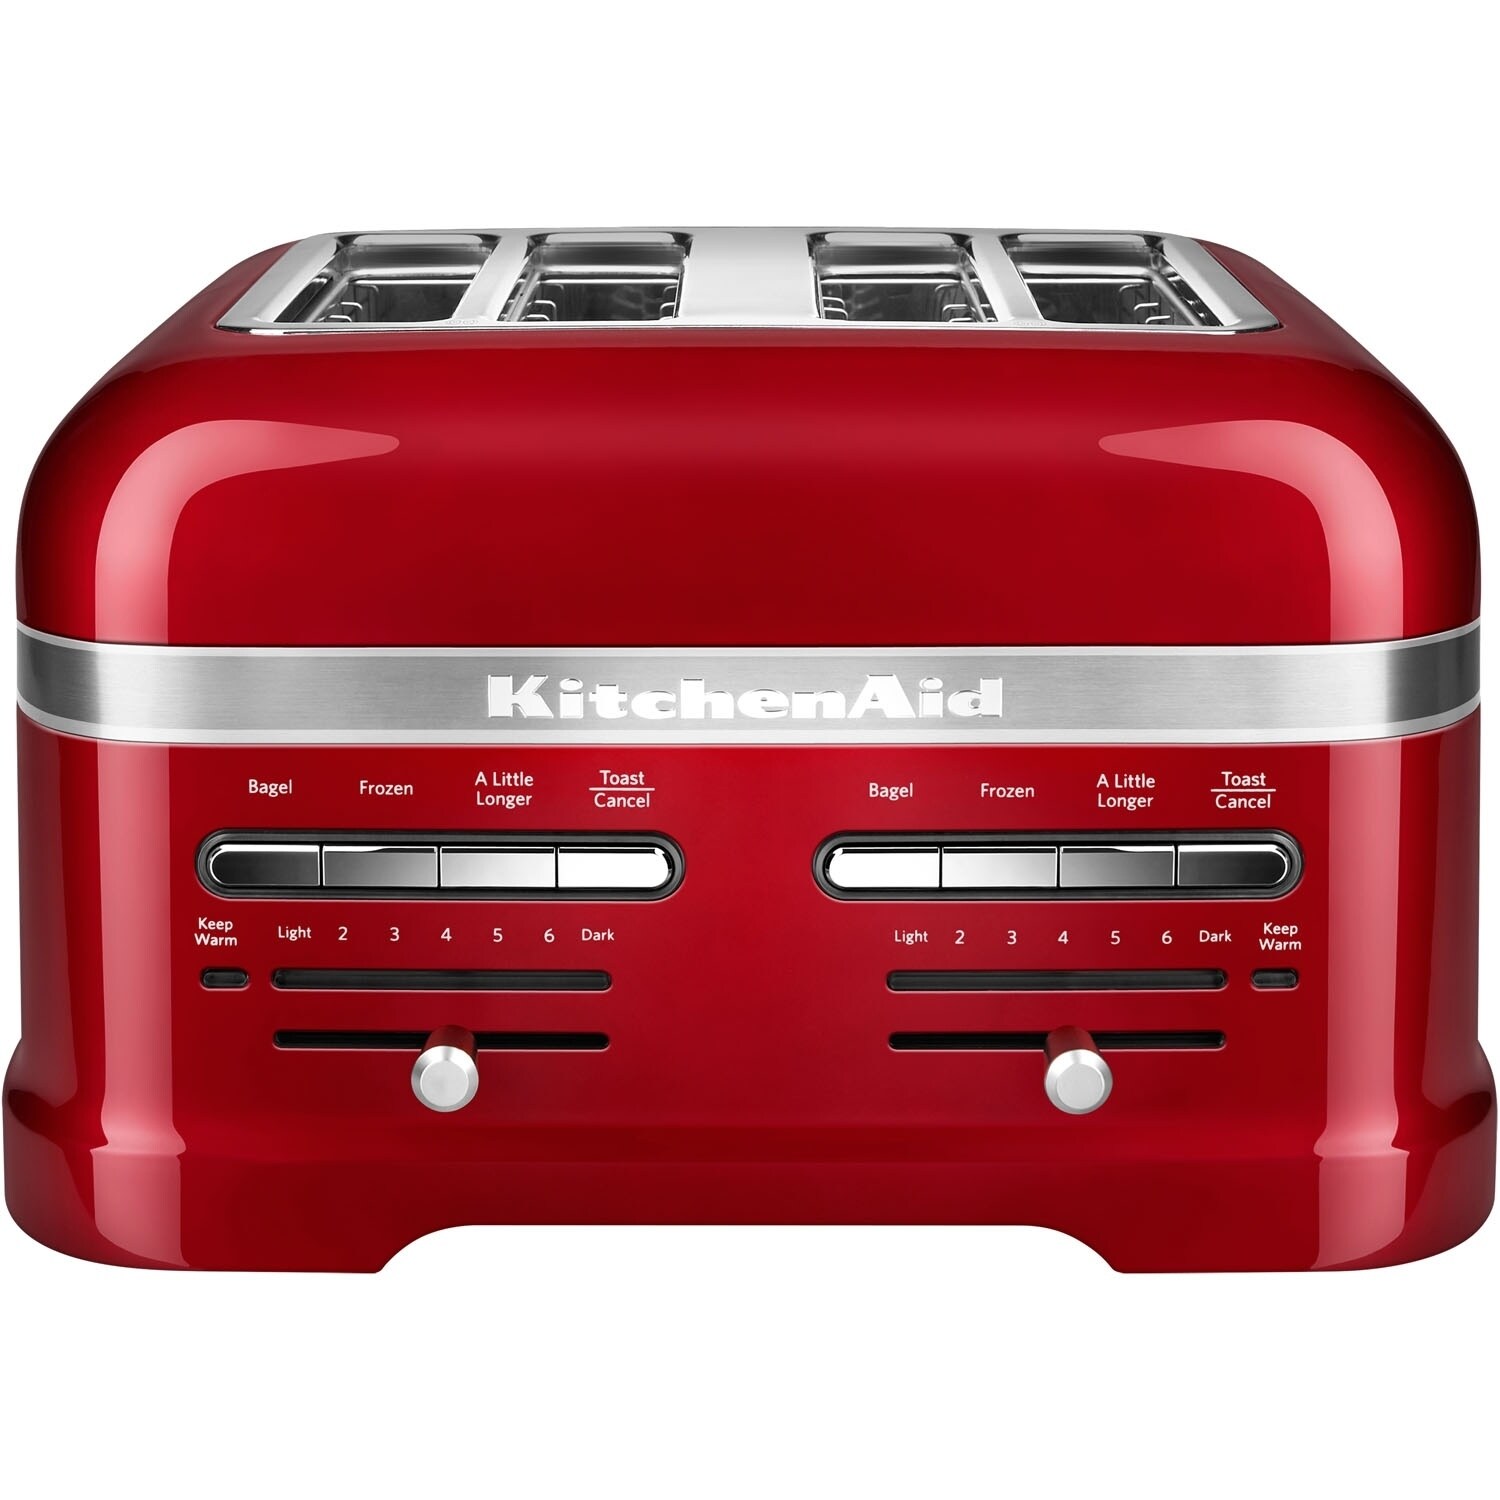 https://ak1.ostkcdn.com/images/products/24224221/KitchenAid-Pro-Line-4-Slice-Automatic-Toaster-with-Dual-Independent-Controls-in-Candy-Apple-Red-eb5f9d91-65ab-482a-9290-a1a56e0dcf41.jpg